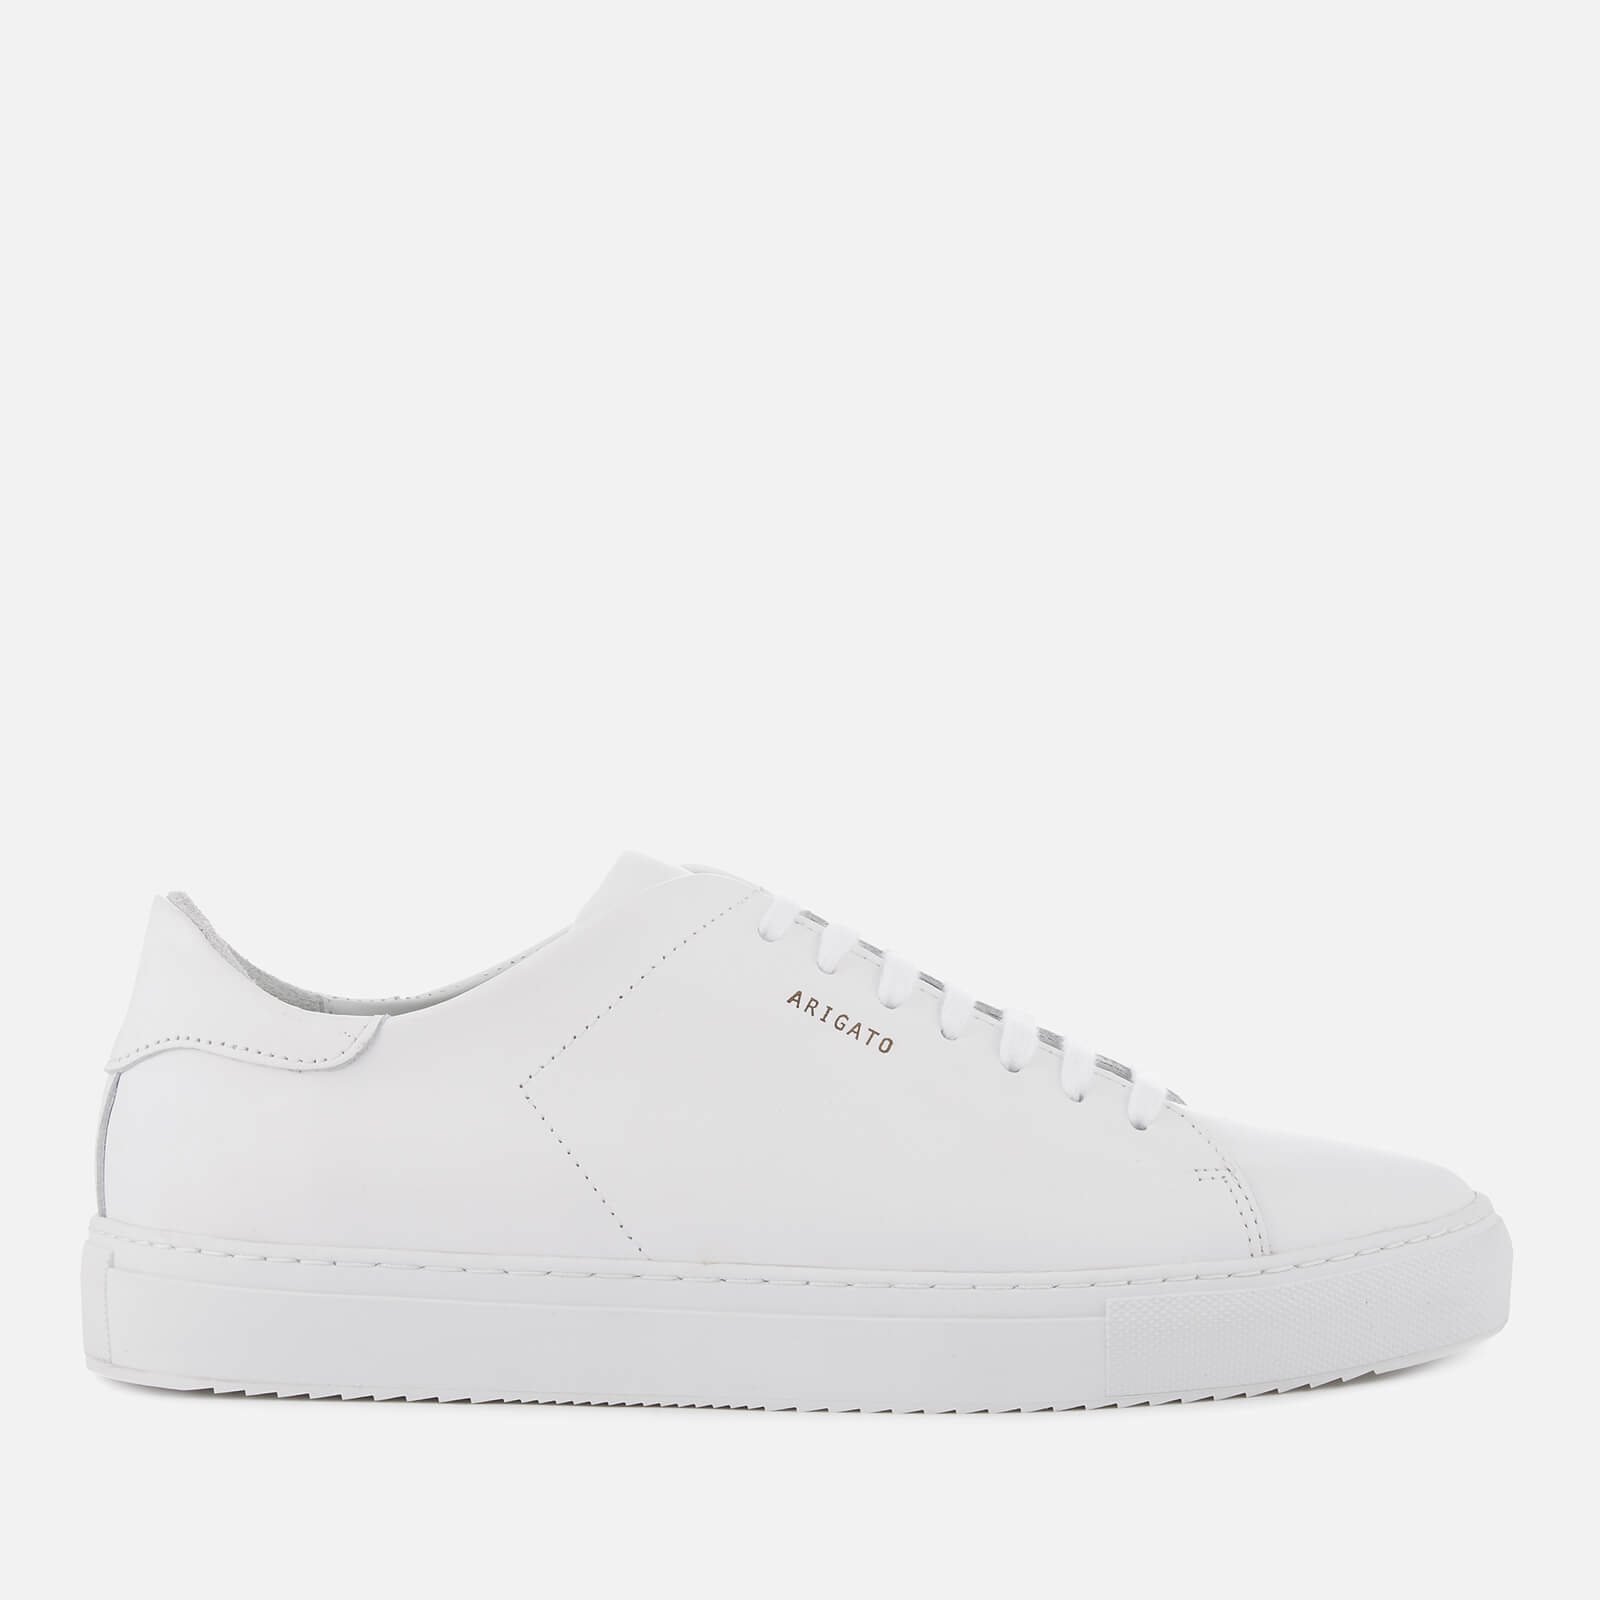 Axel Arigato Men's Clean 90 Leather Cupsole Trainers - White - UK 9